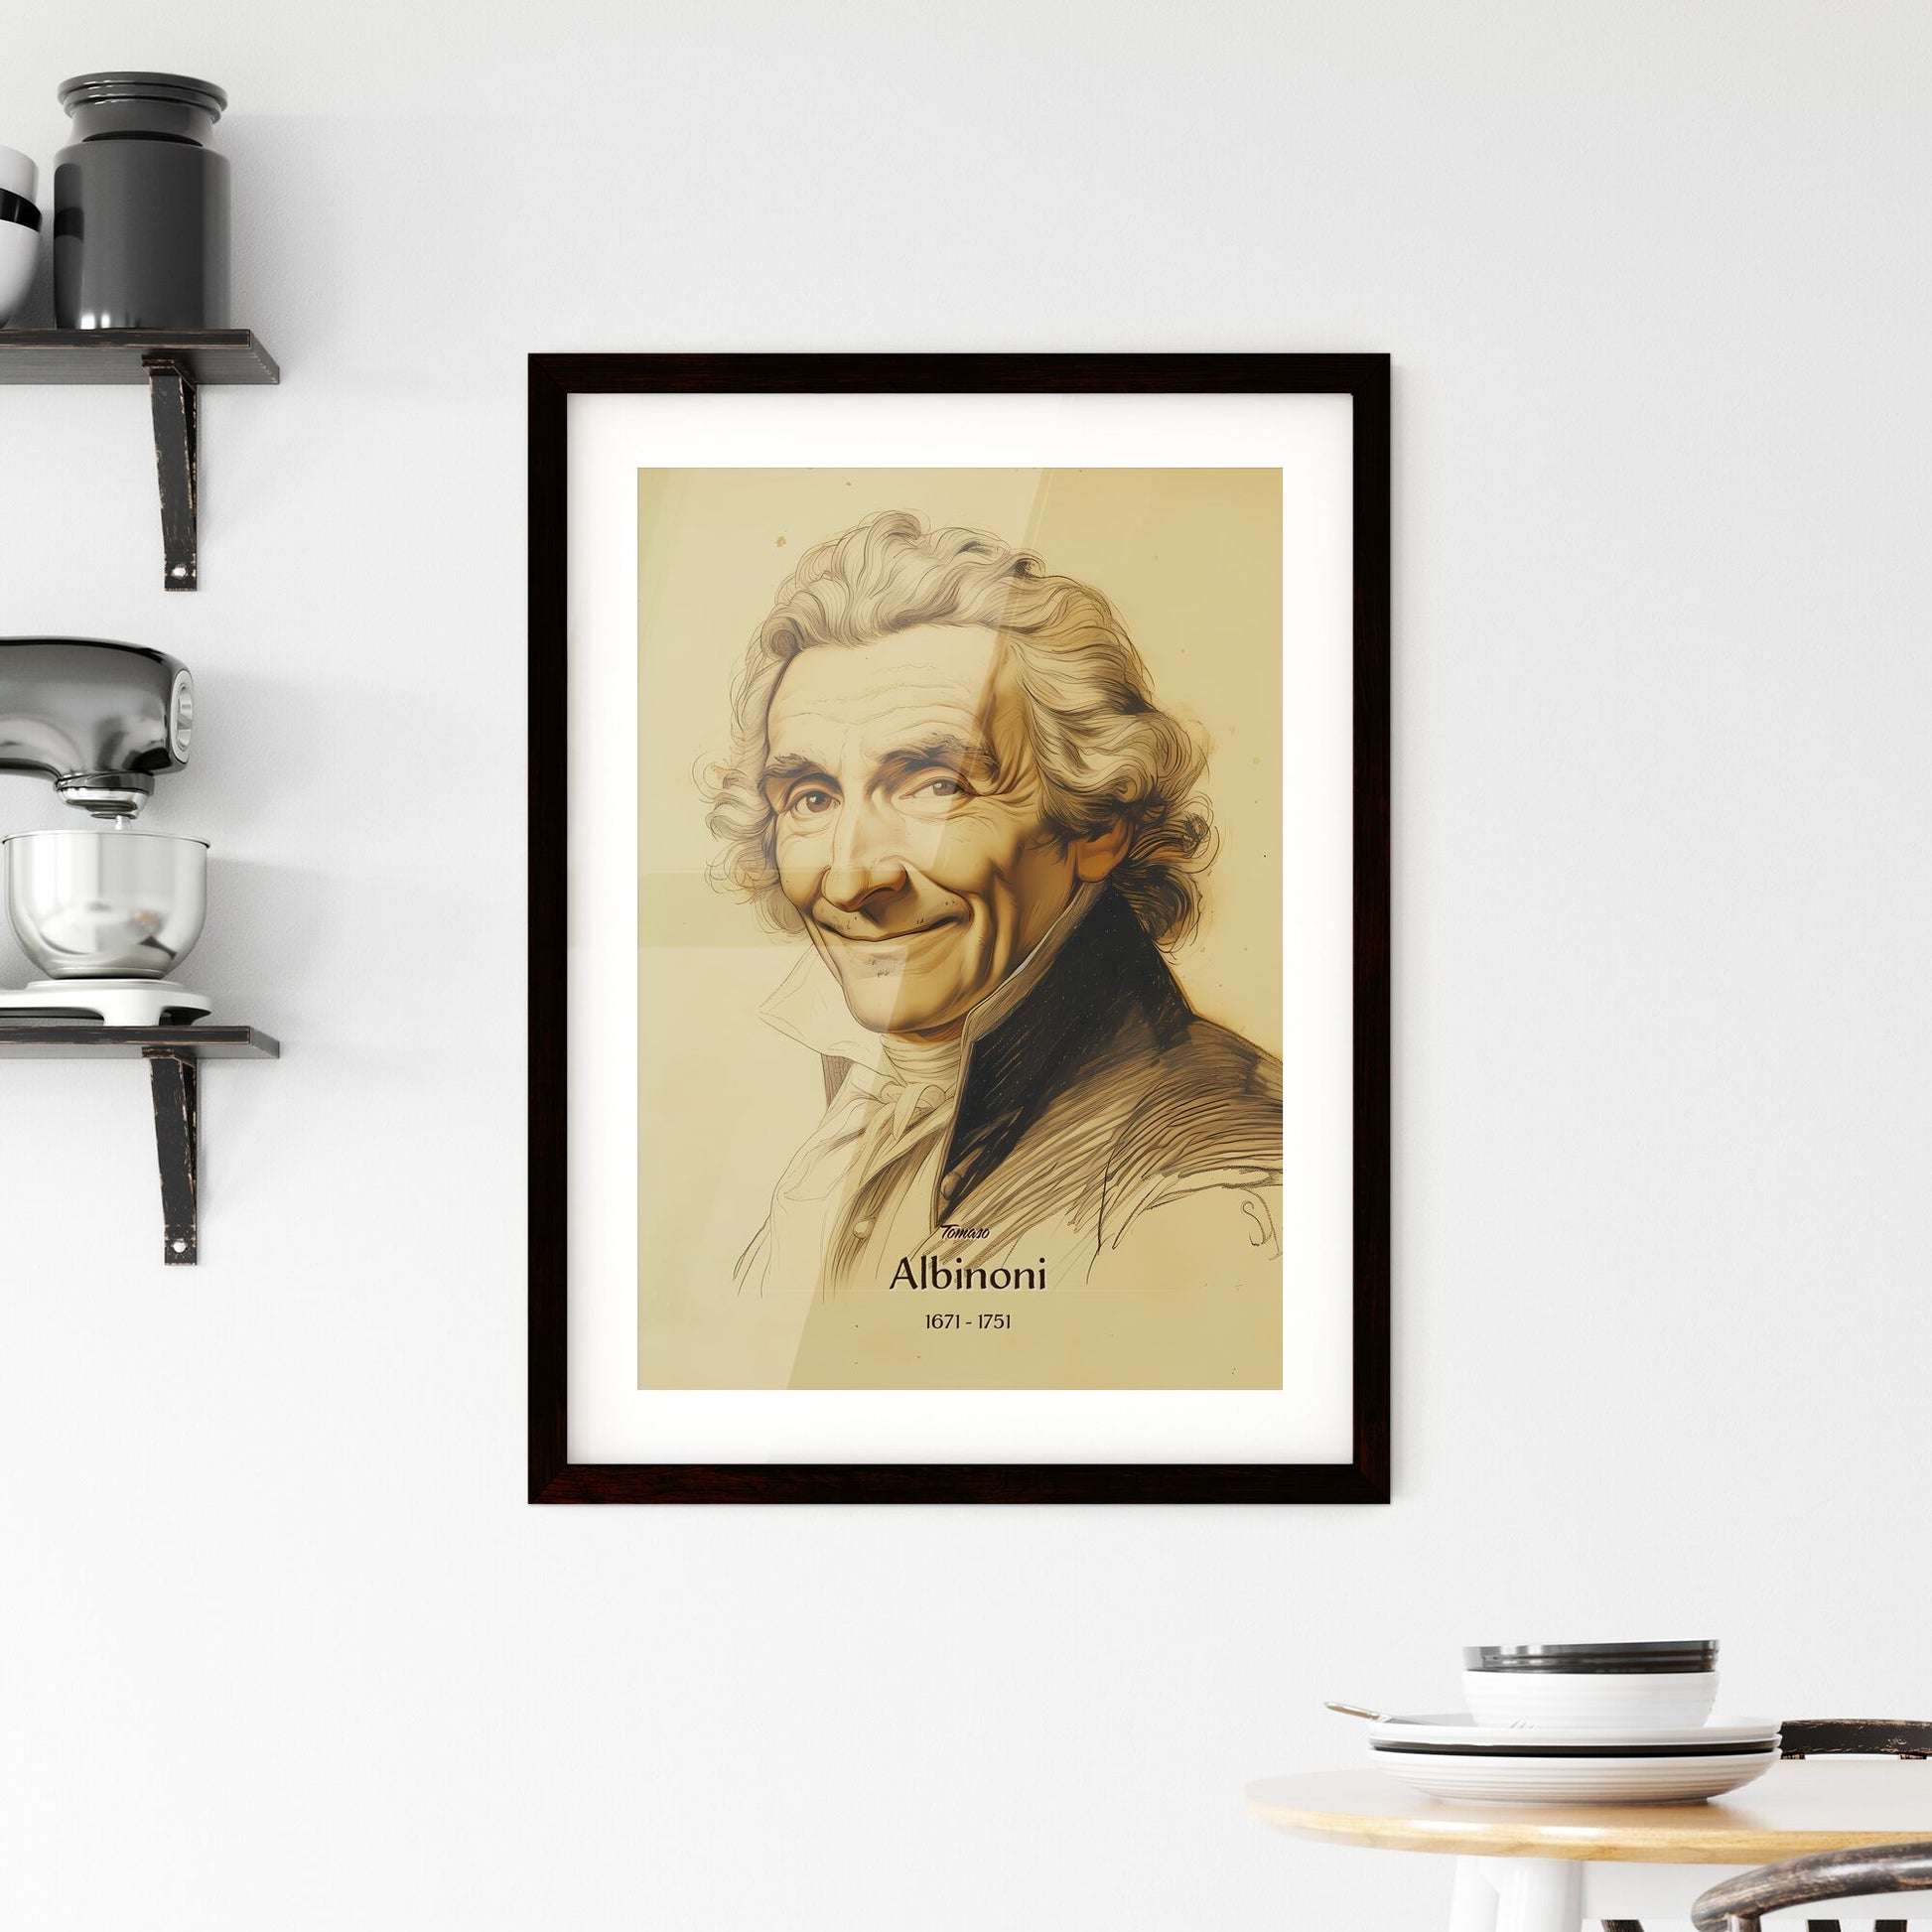 Tomaso, Albinoni, 1671 - 1751, A Poster of a drawing of a man smiling Default Title